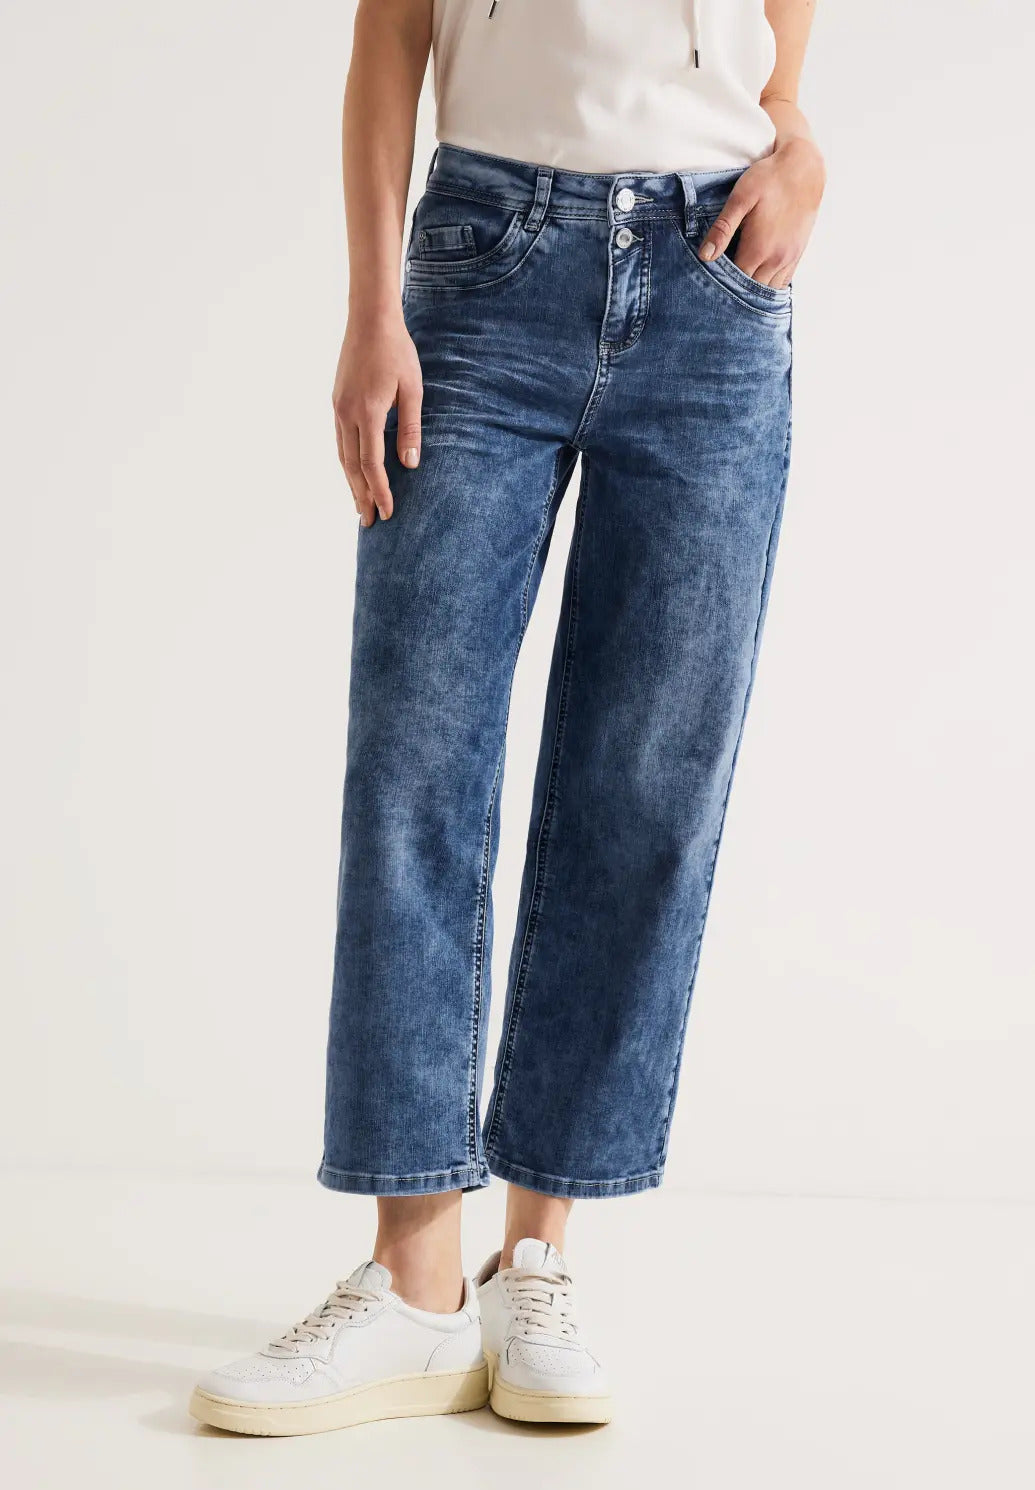 Street One - Jeans - 376654